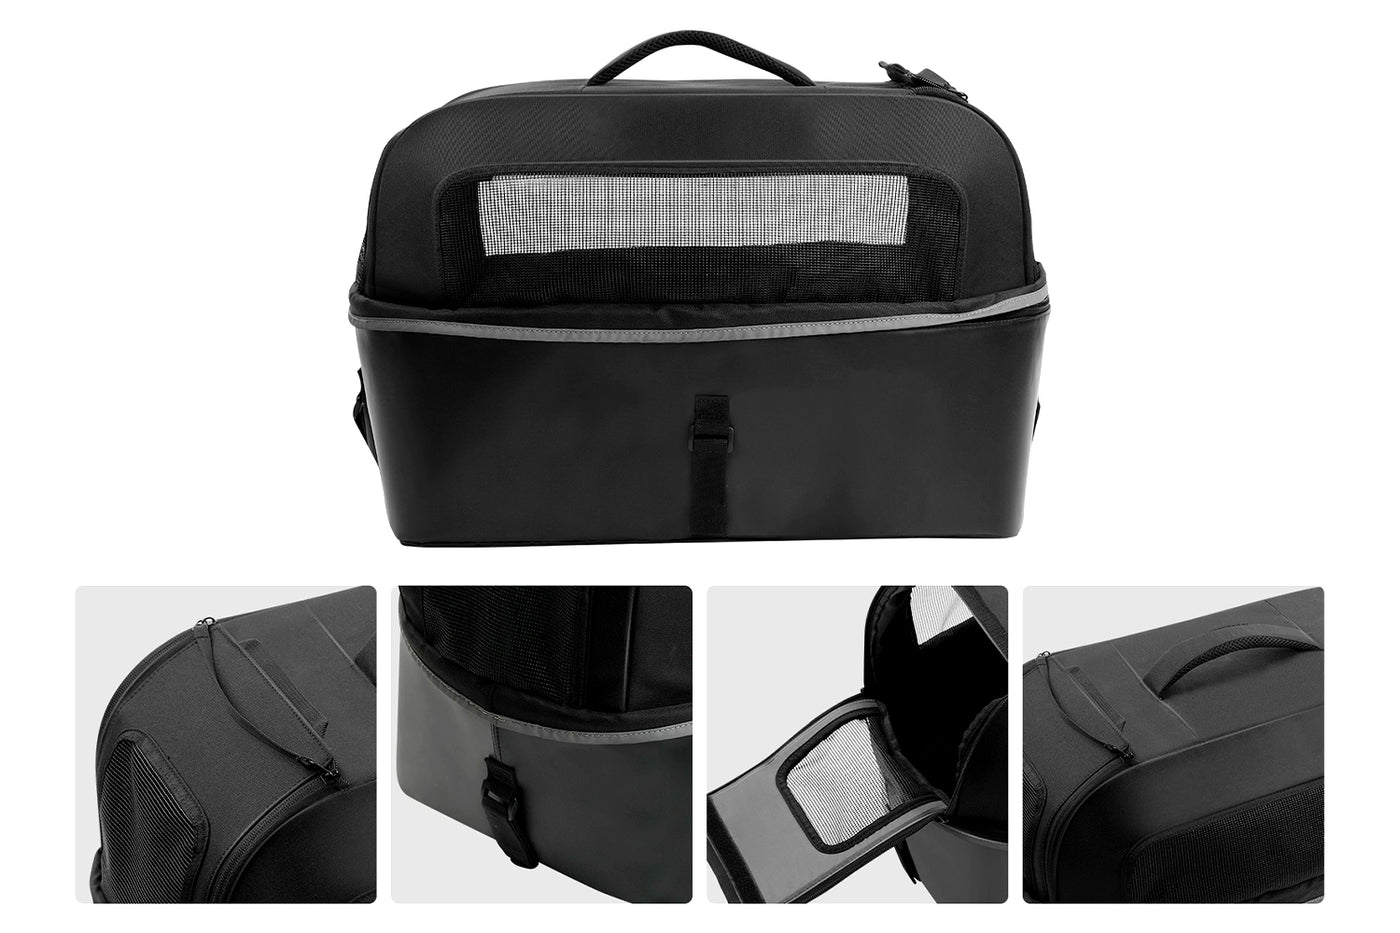 Magicycle Pet Carrier Travel Bag